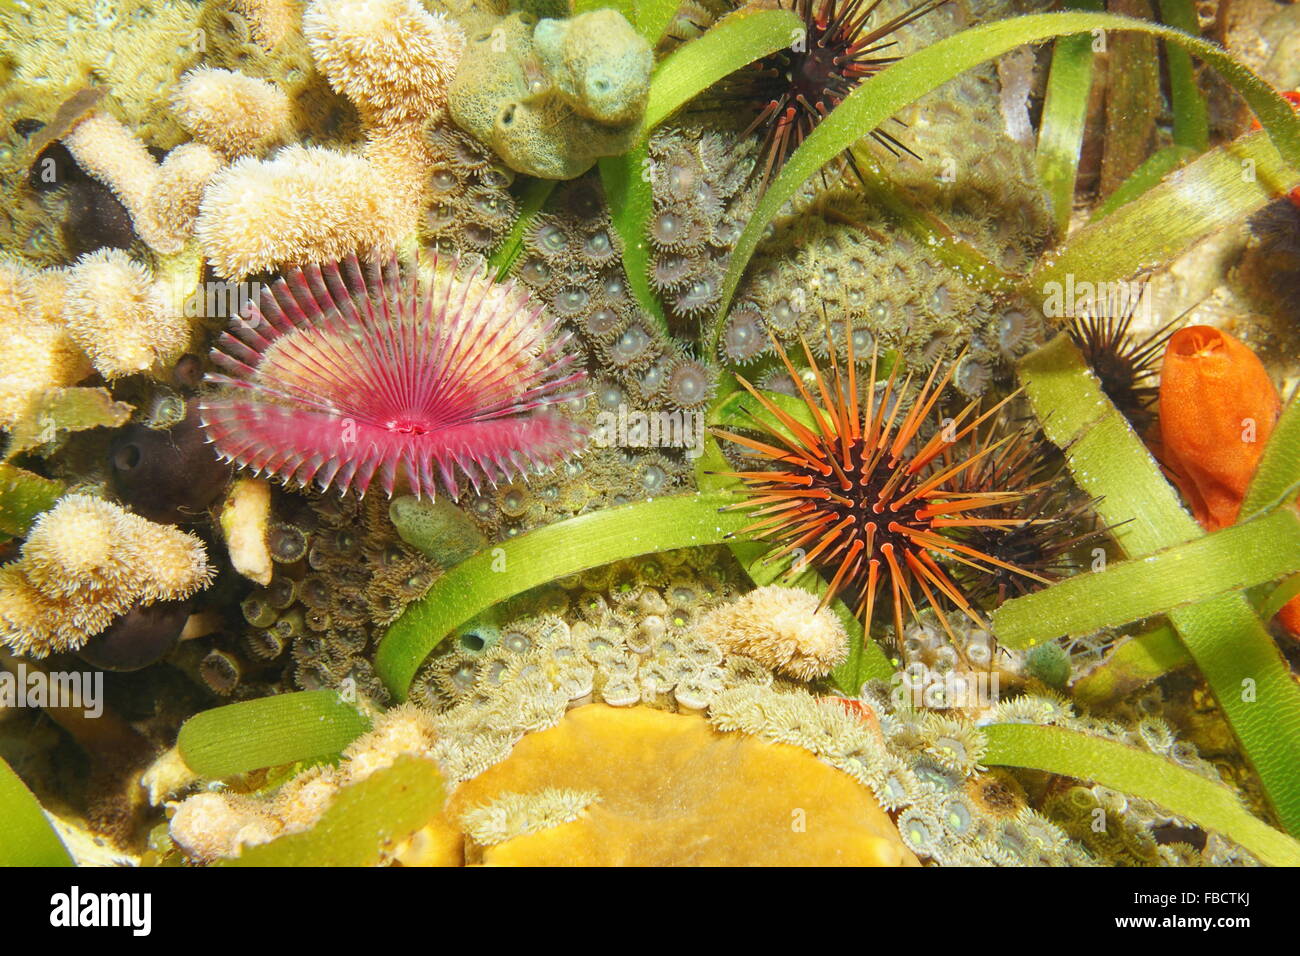 Marine life underwater on the seabed with a split-crown feather duster worm and a reef urchin, Caribbean sea, Central America Stock Photo